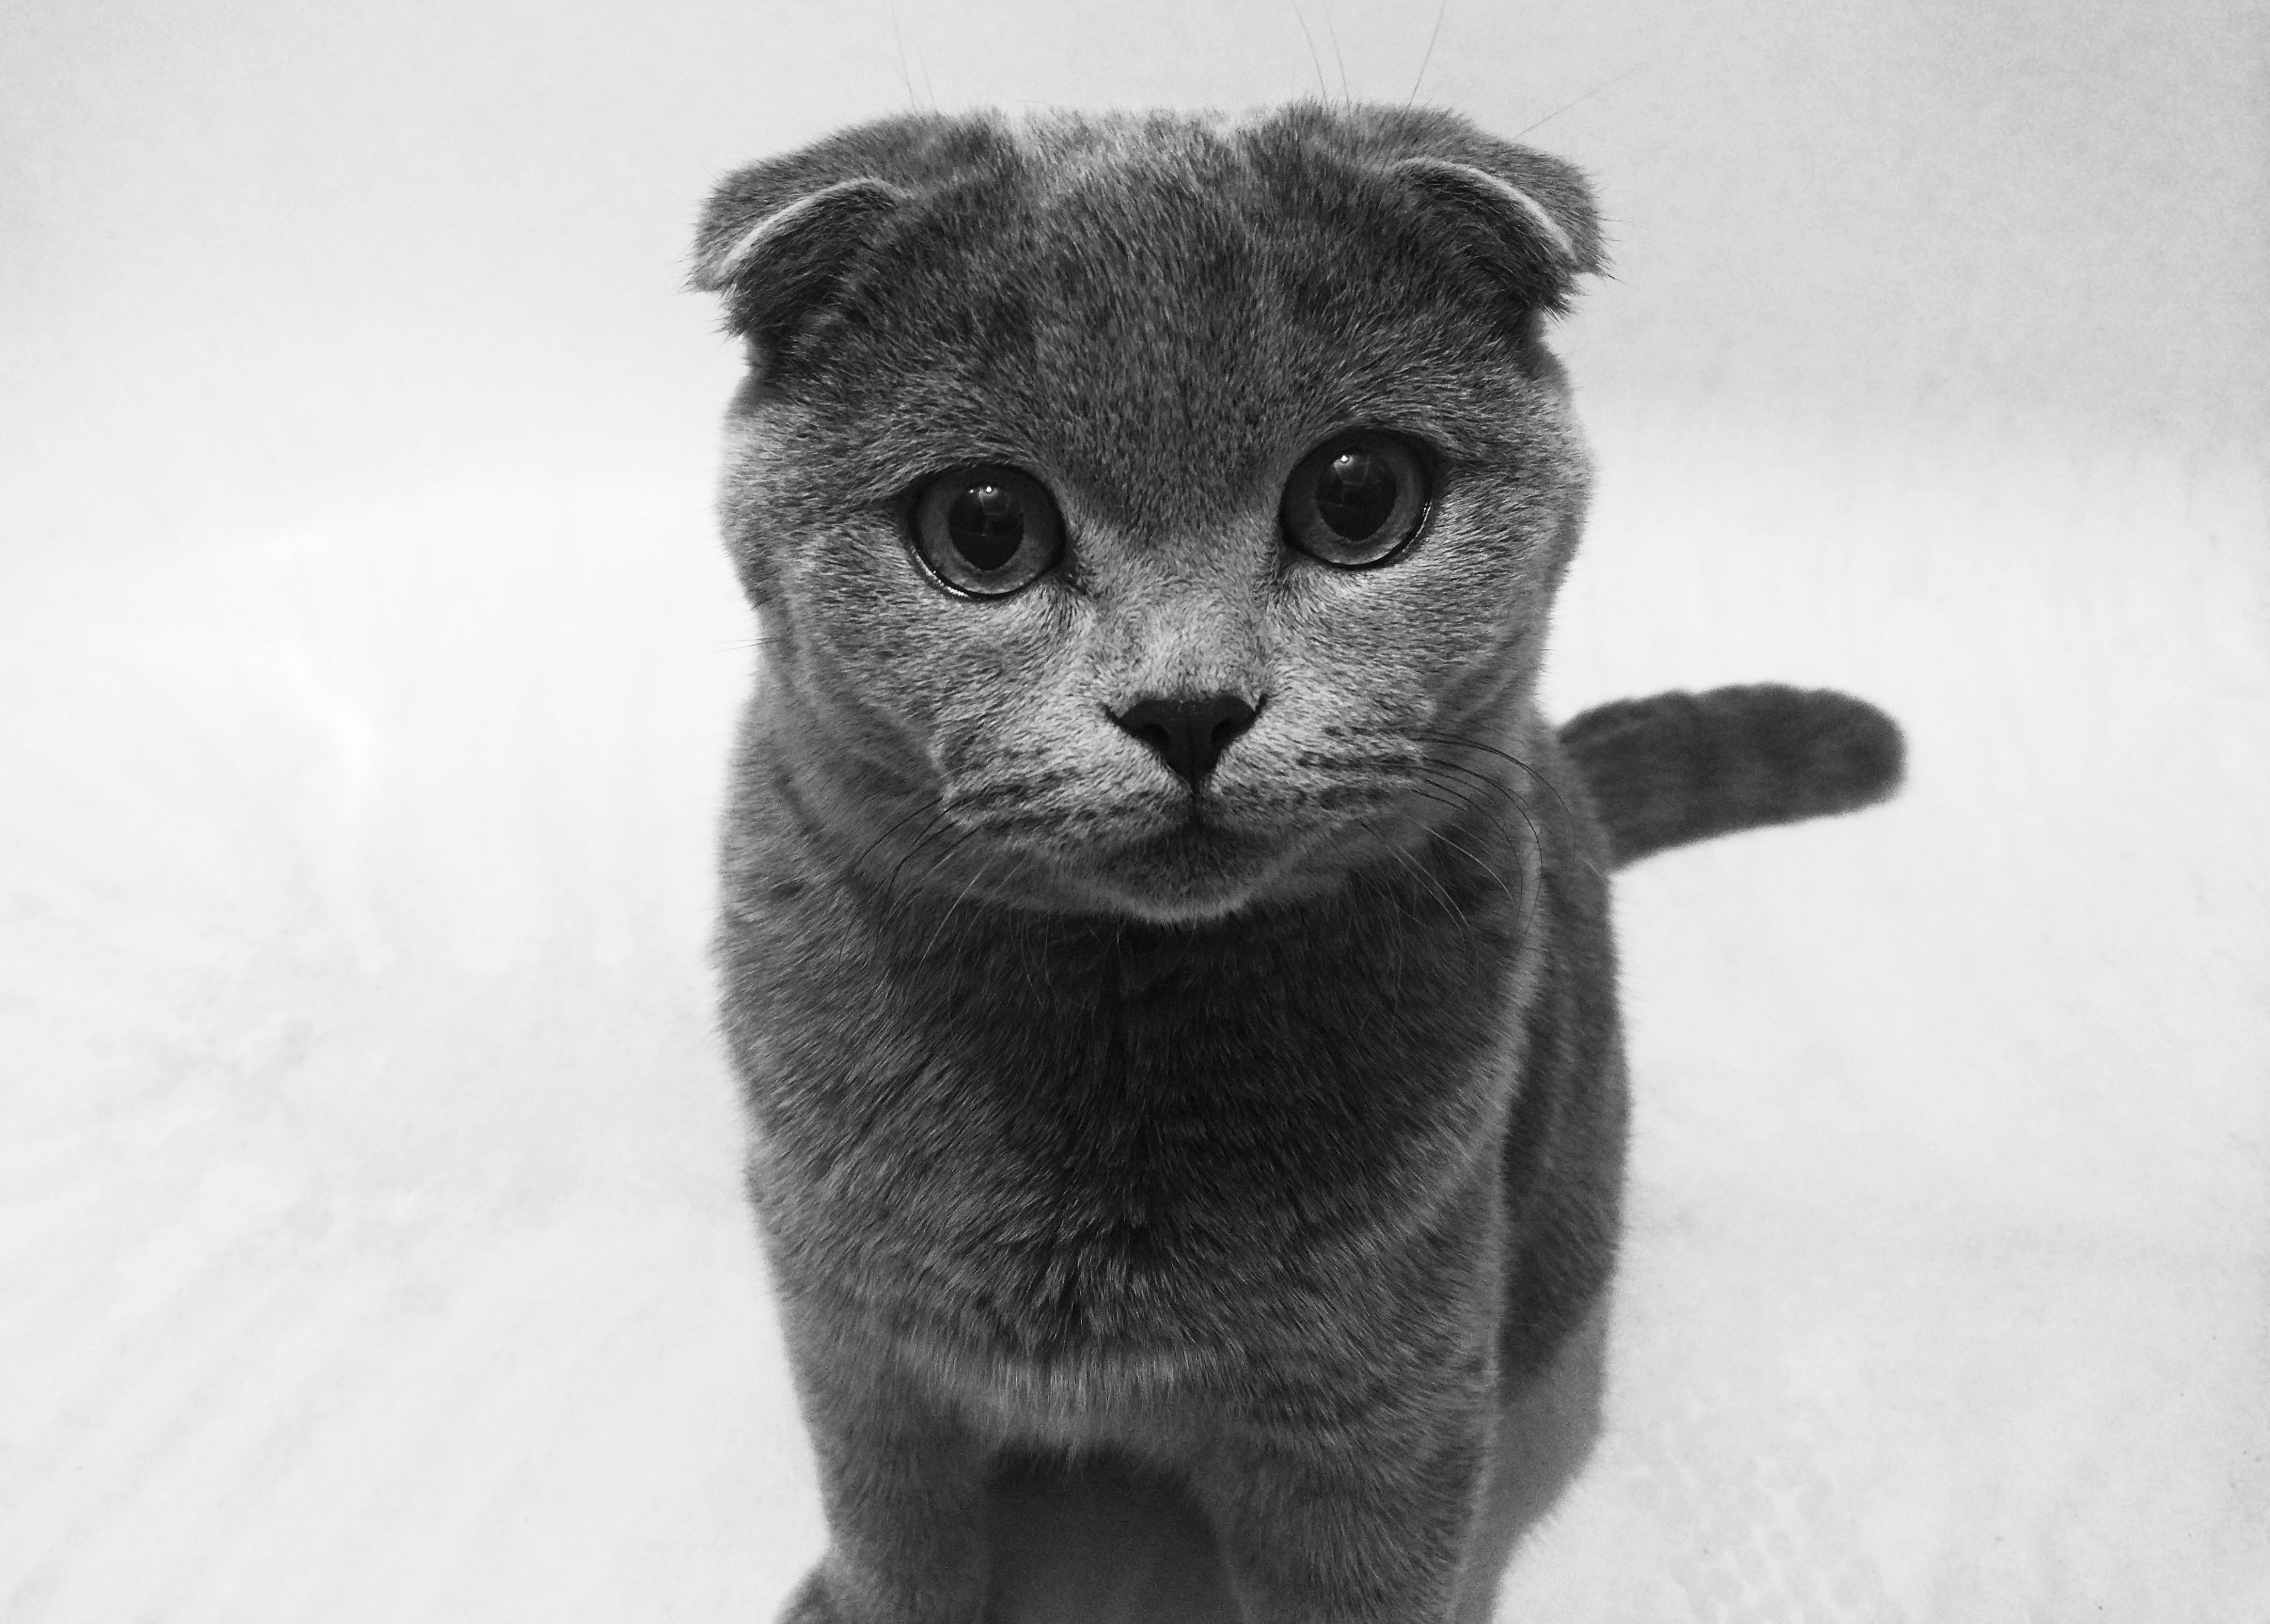 The Scottish Fold: A Quiet Cat with Unique Folded Ears